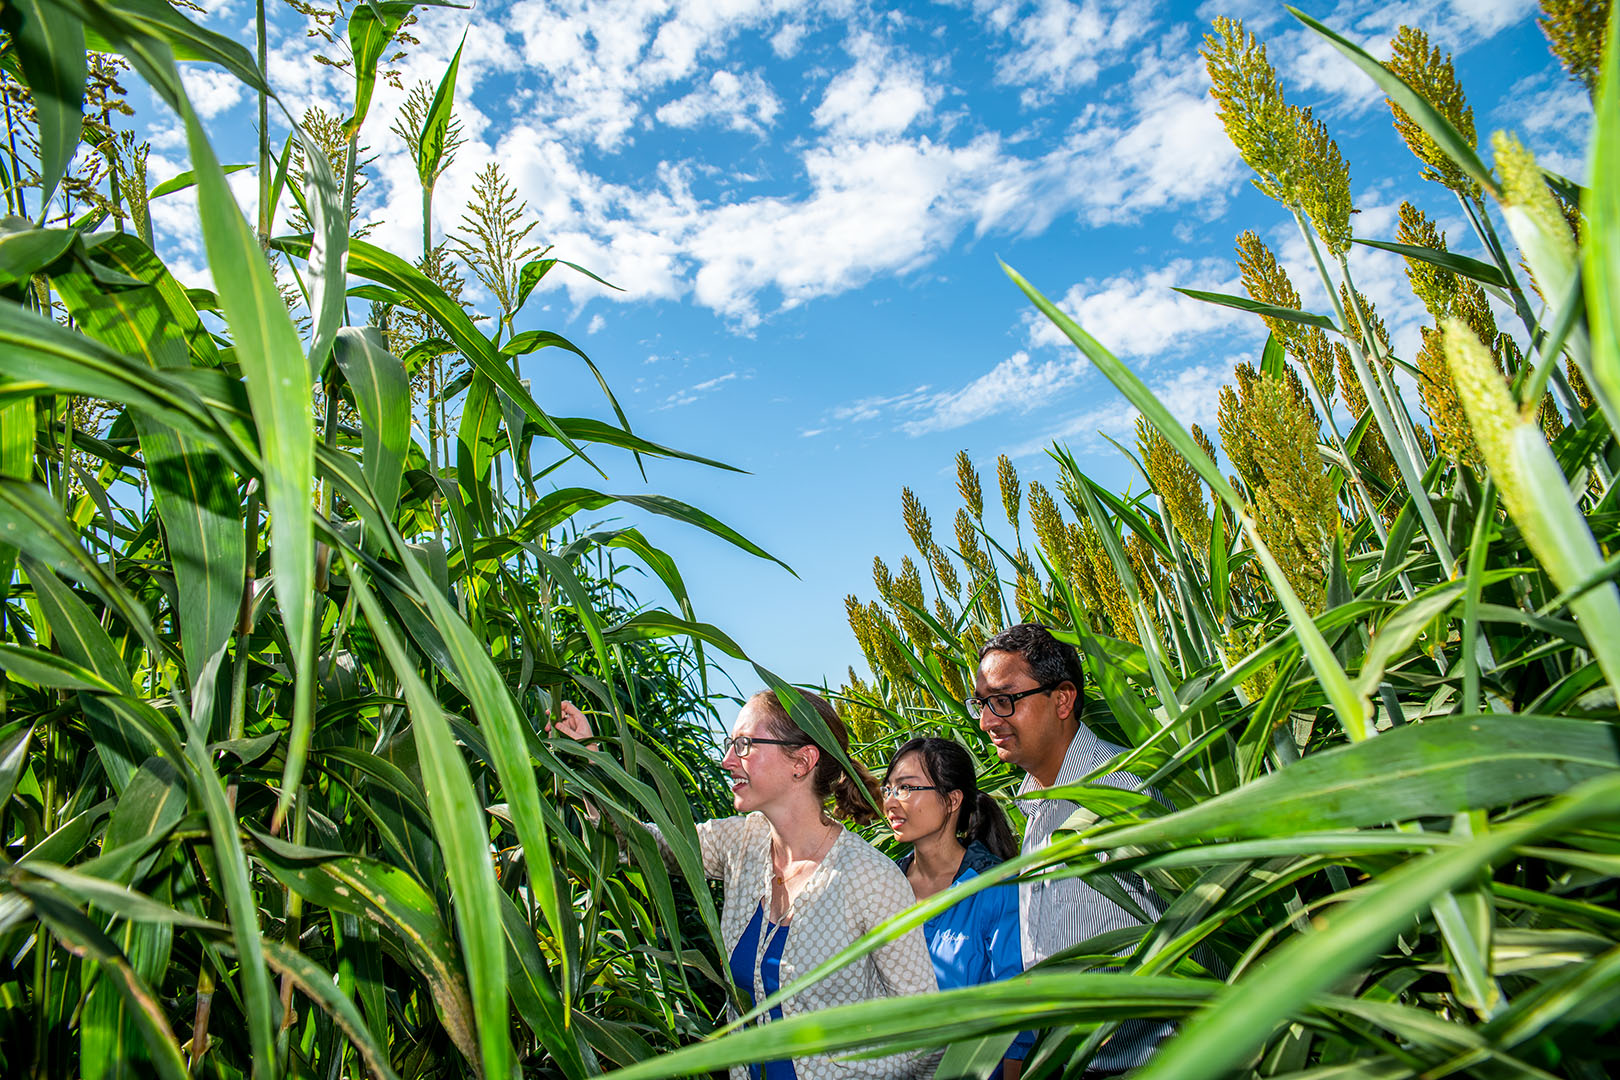 Three people standing in a sorghum field.